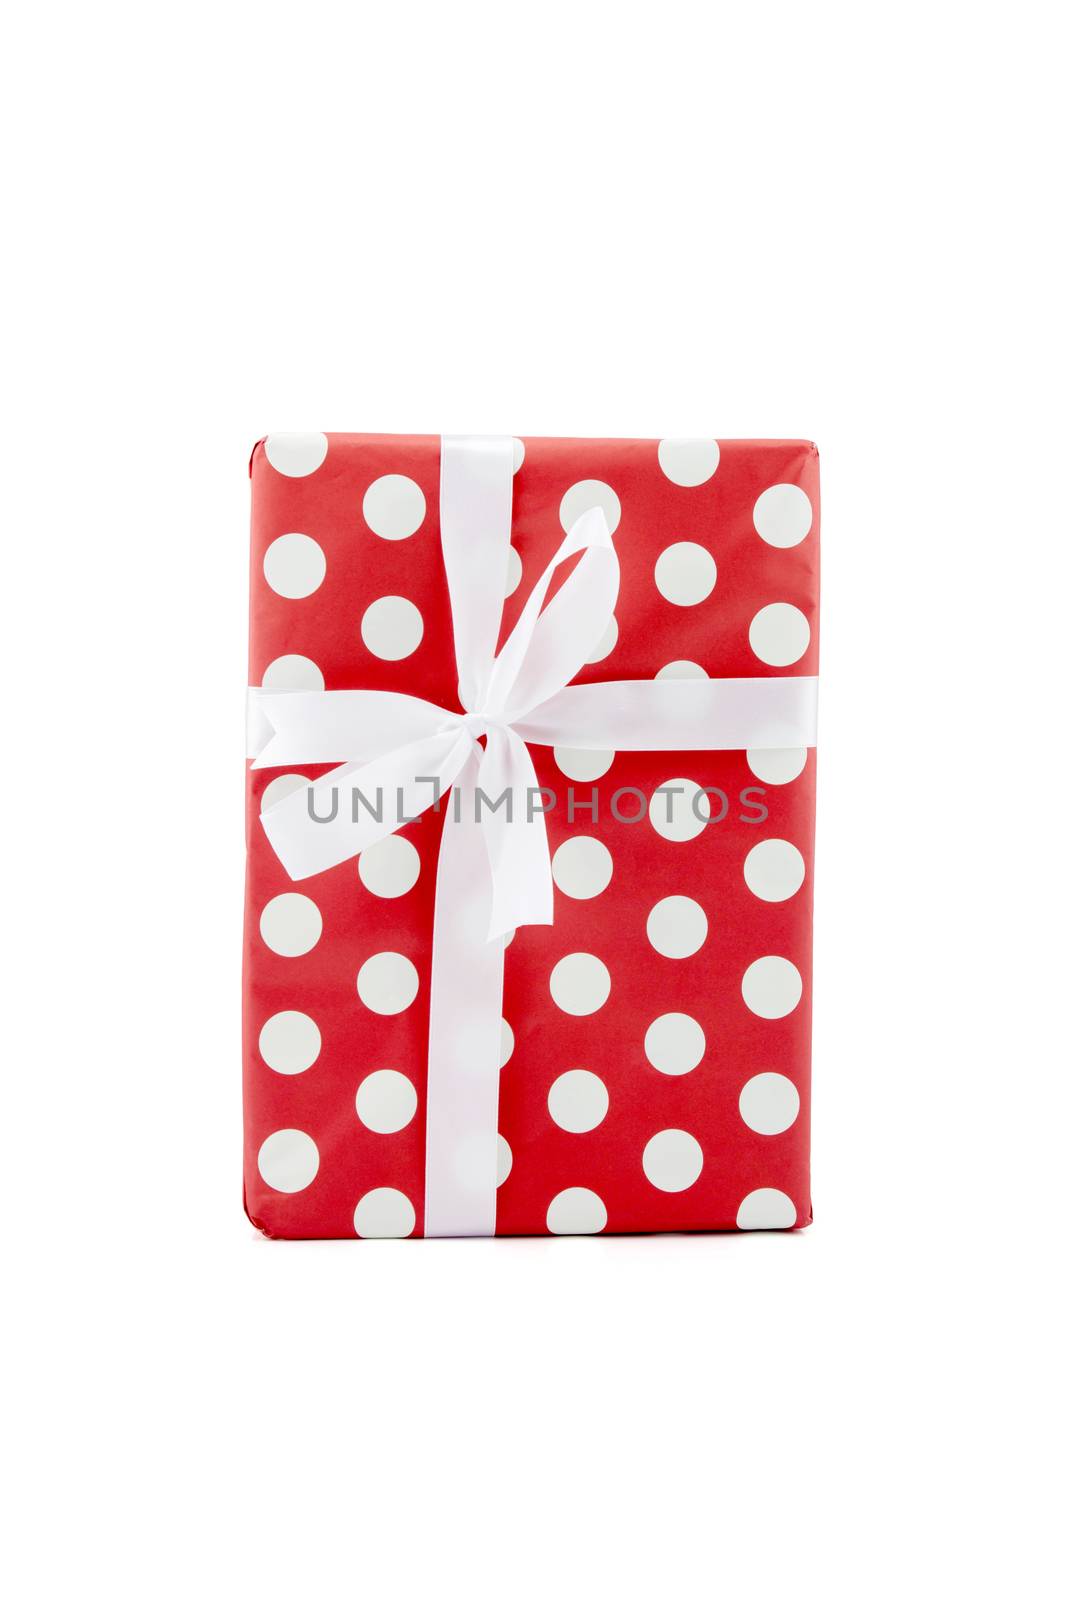 Red gift box and white ribbon in season Christmas and new year i by nnudoo